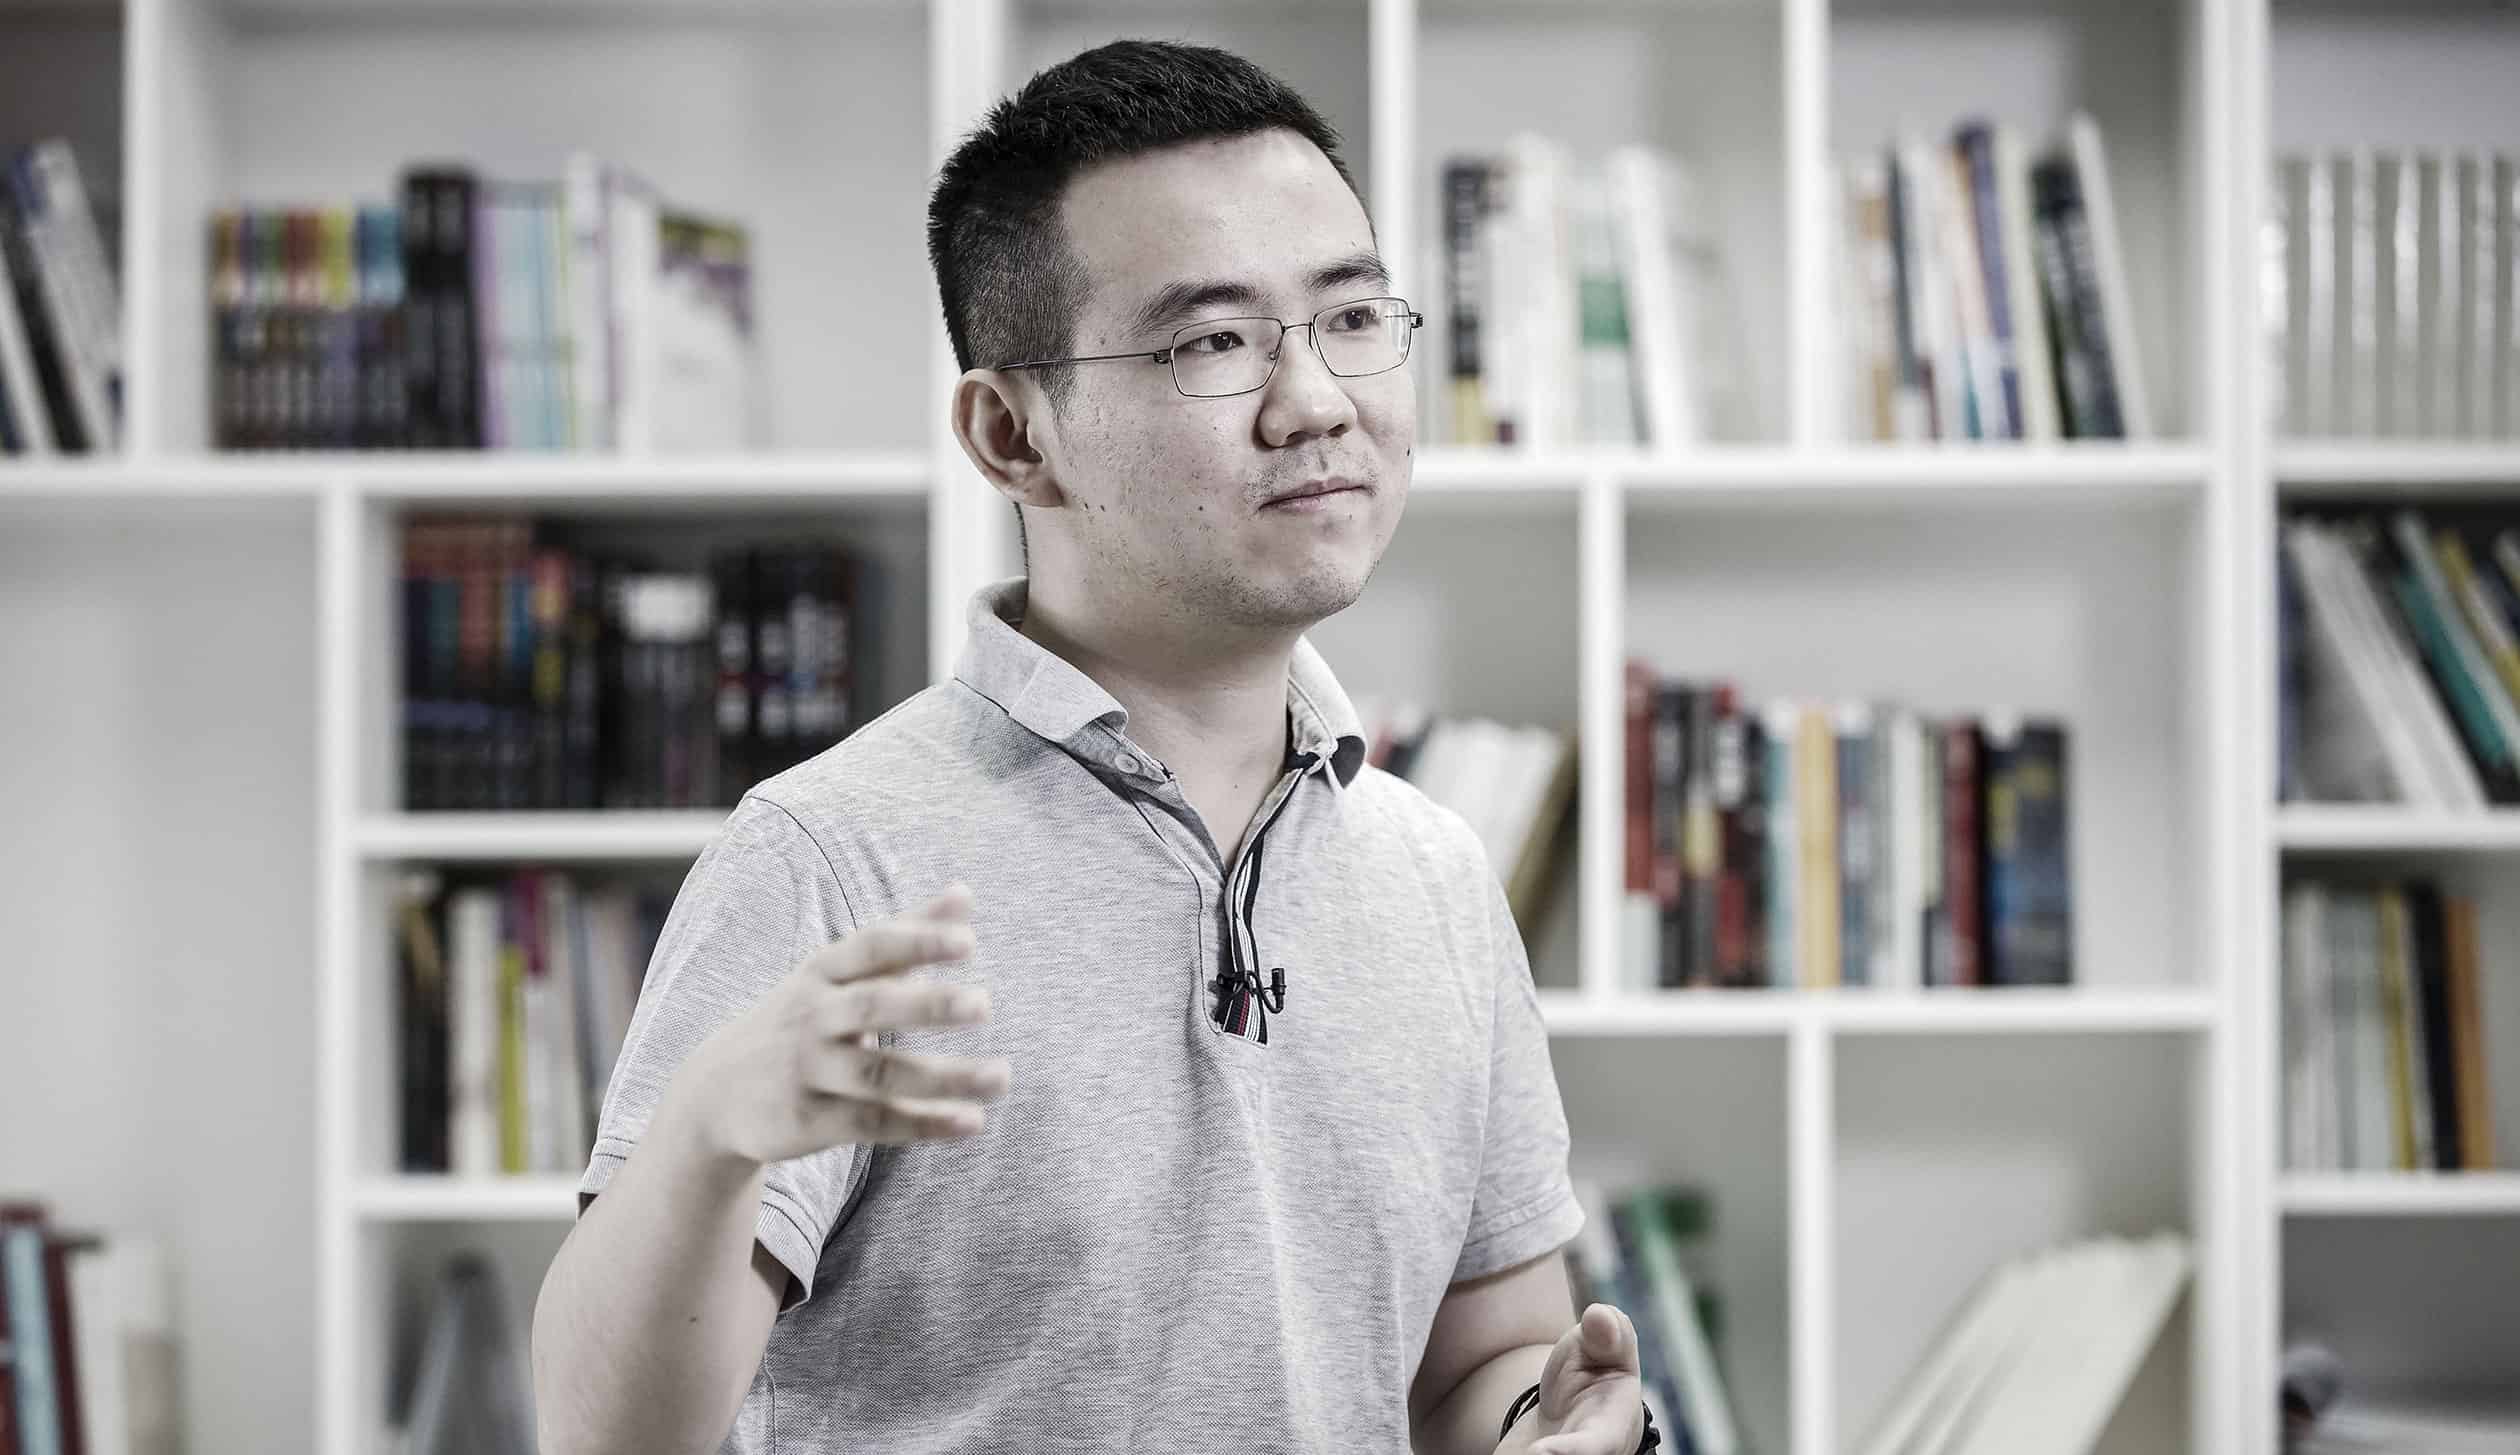 Regulations Could be Healthy for Crypto, Says Bitmain’s Former CEO Jihan Wu